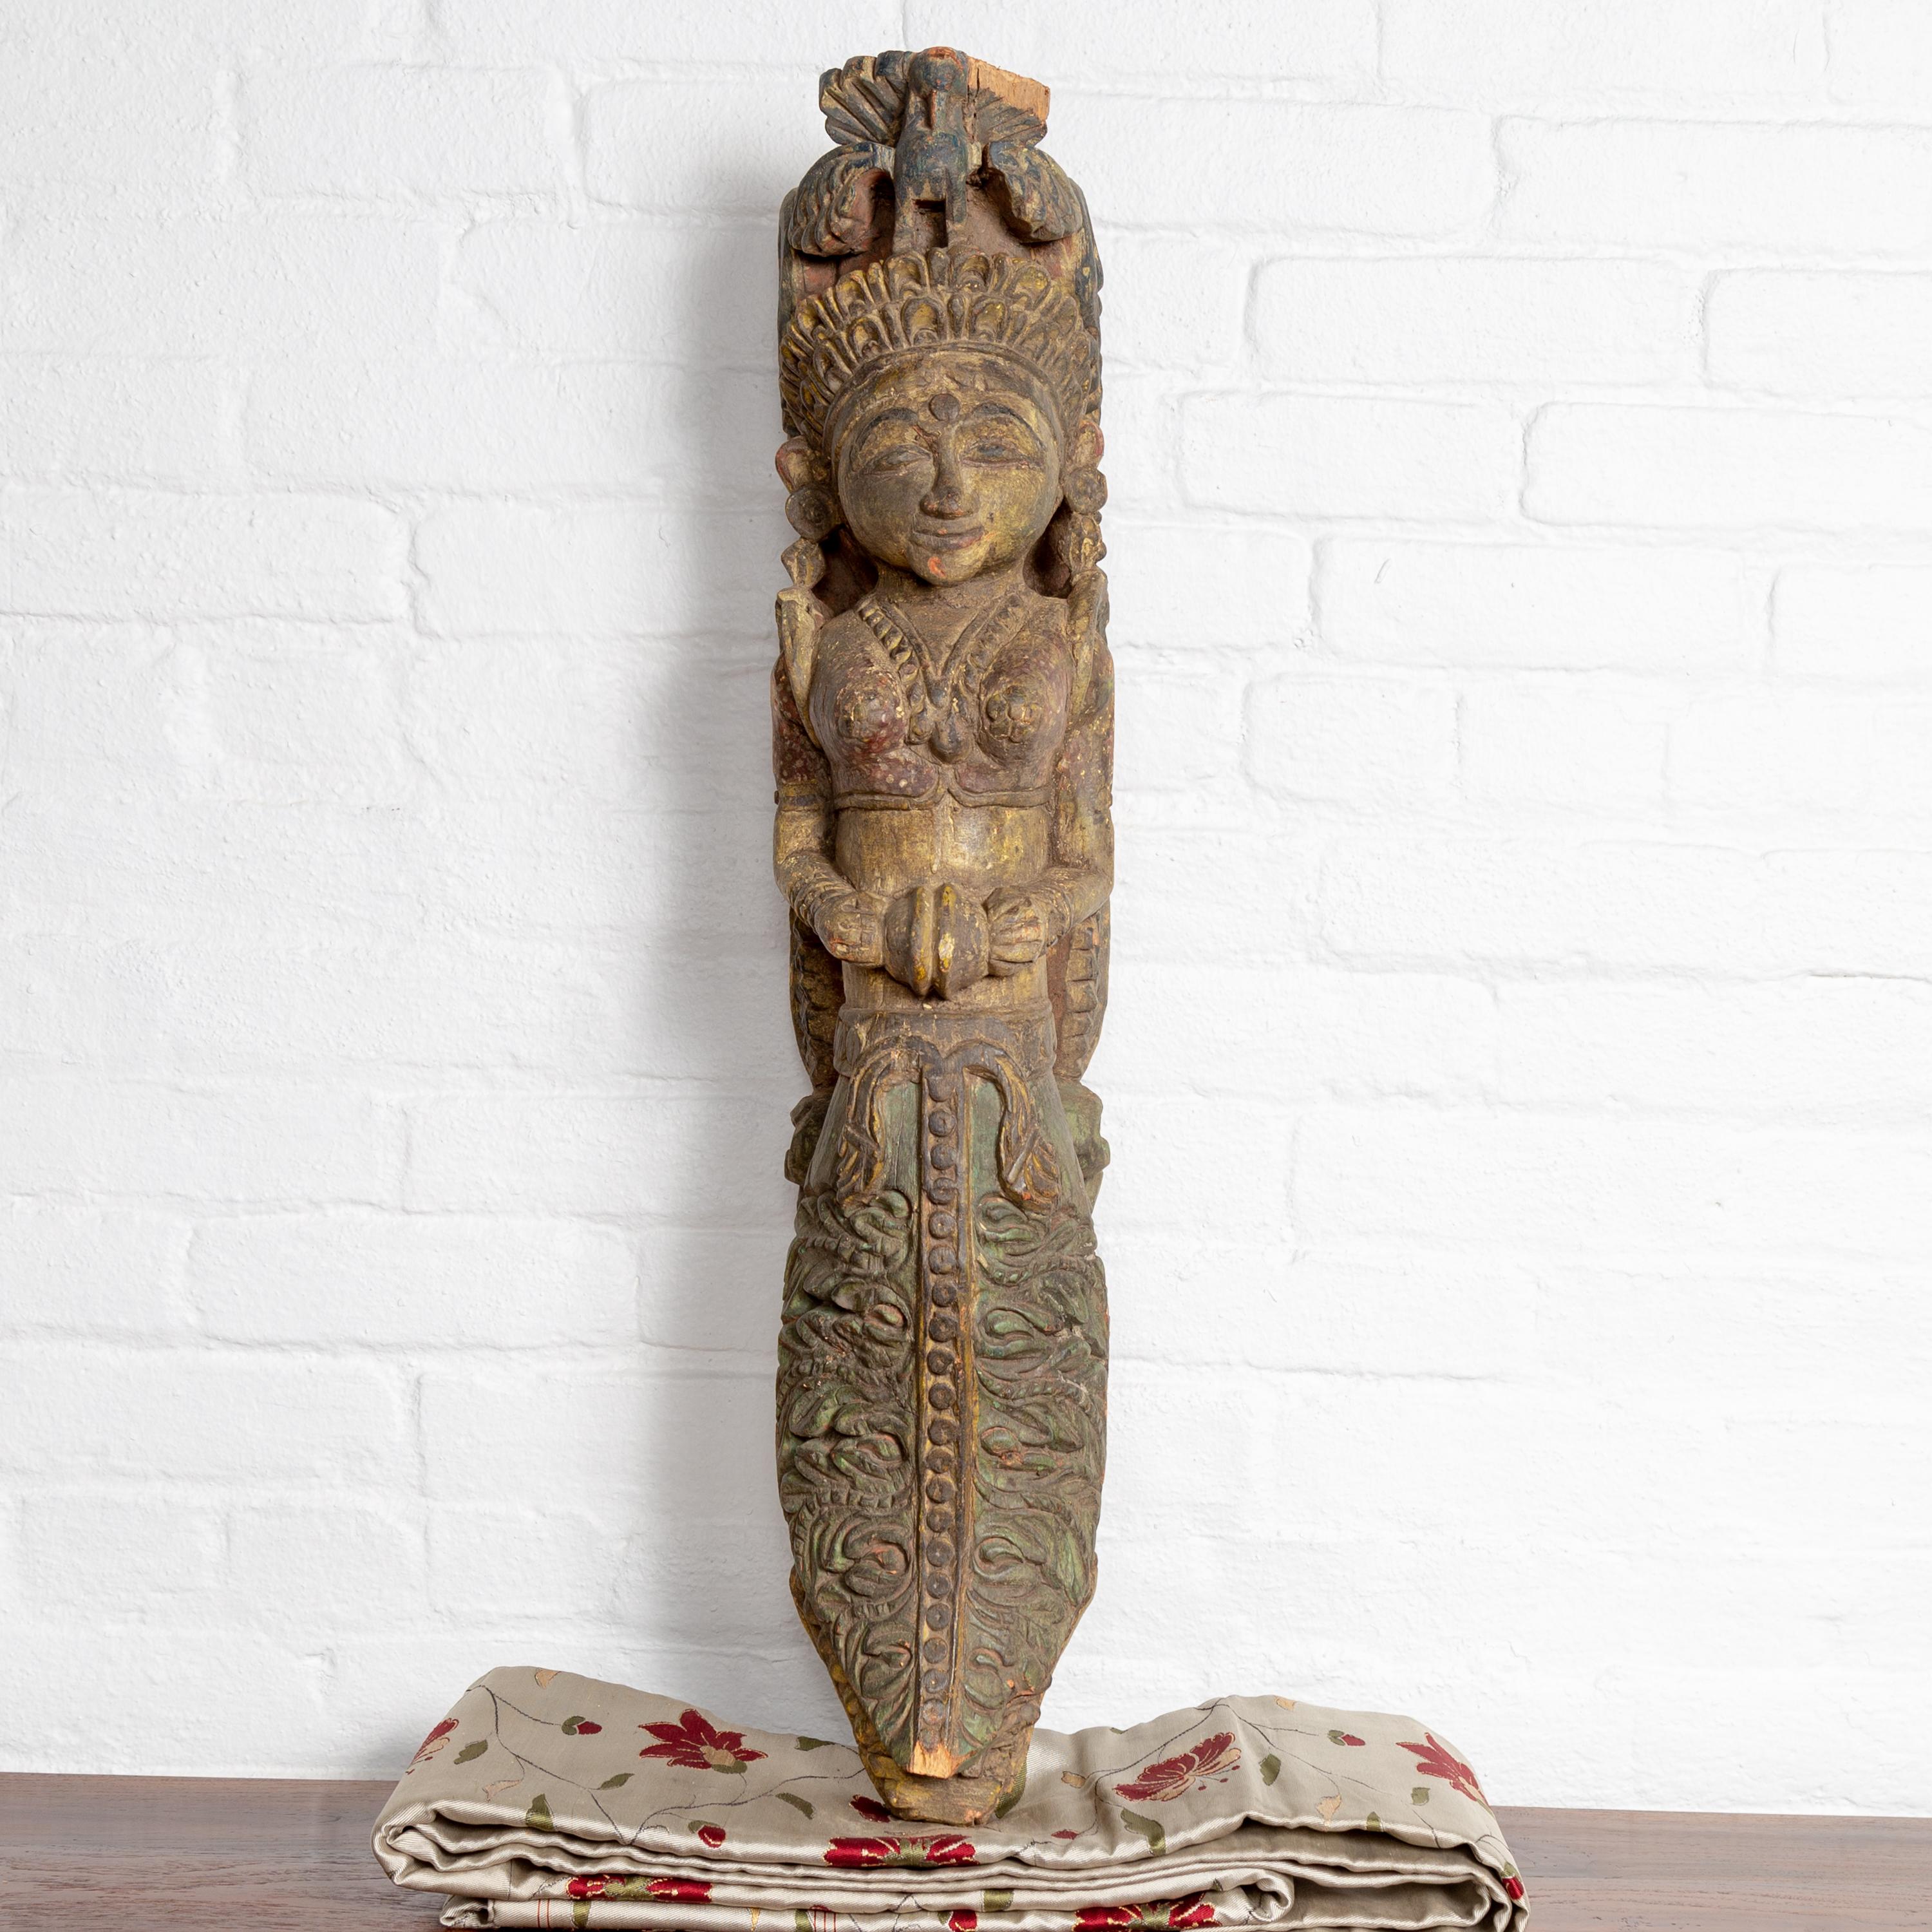 An antique Indian polychrome and hand carved wooden sculpture from the early 20th century, depicting a celestial musician playing an instrument. This captivating wooden sculpture beautifully captures the essence of celestial music through its